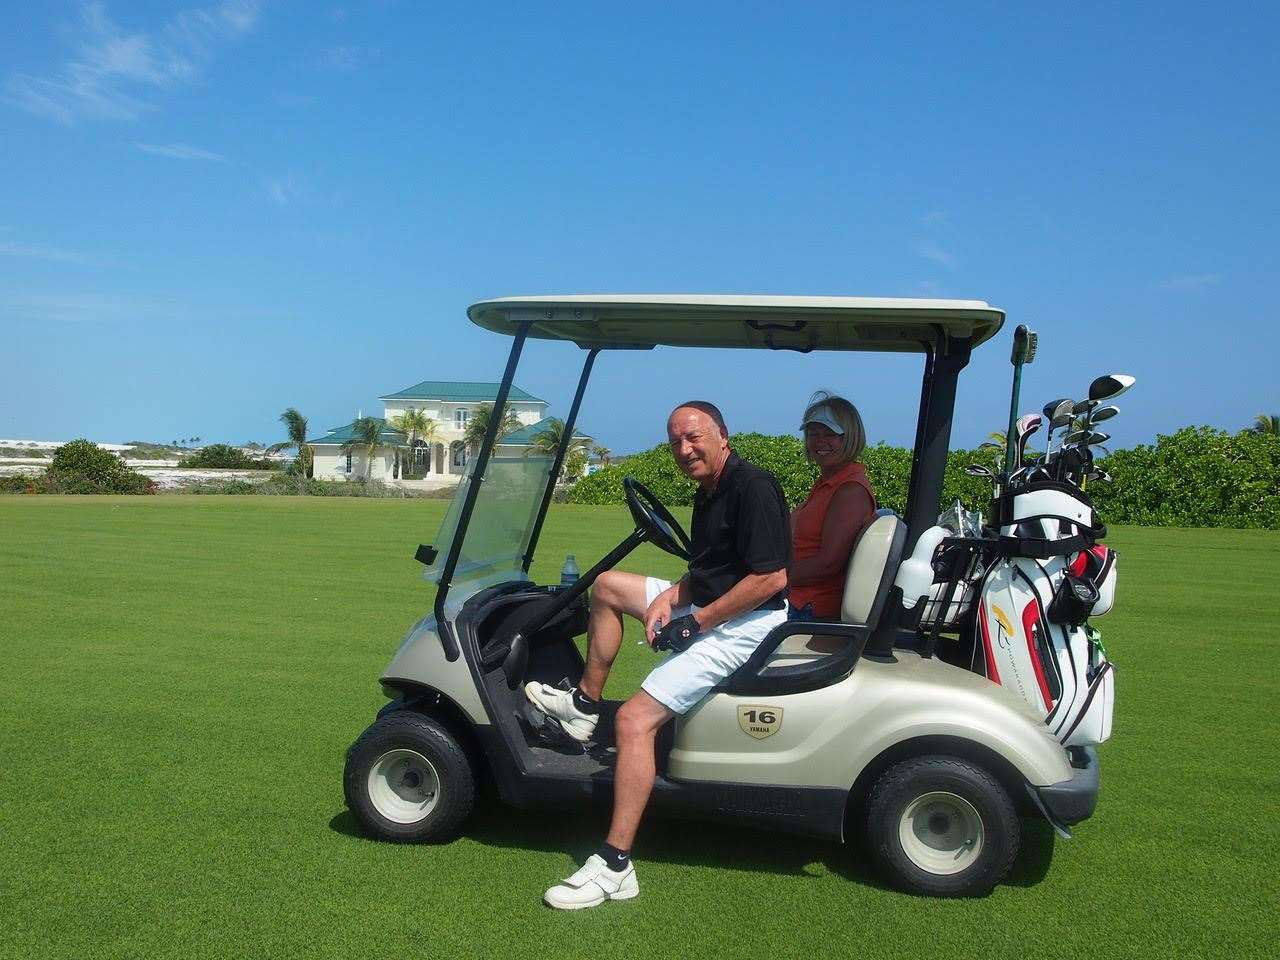 Allan Jordan and his wife Sharon in a golf buggy